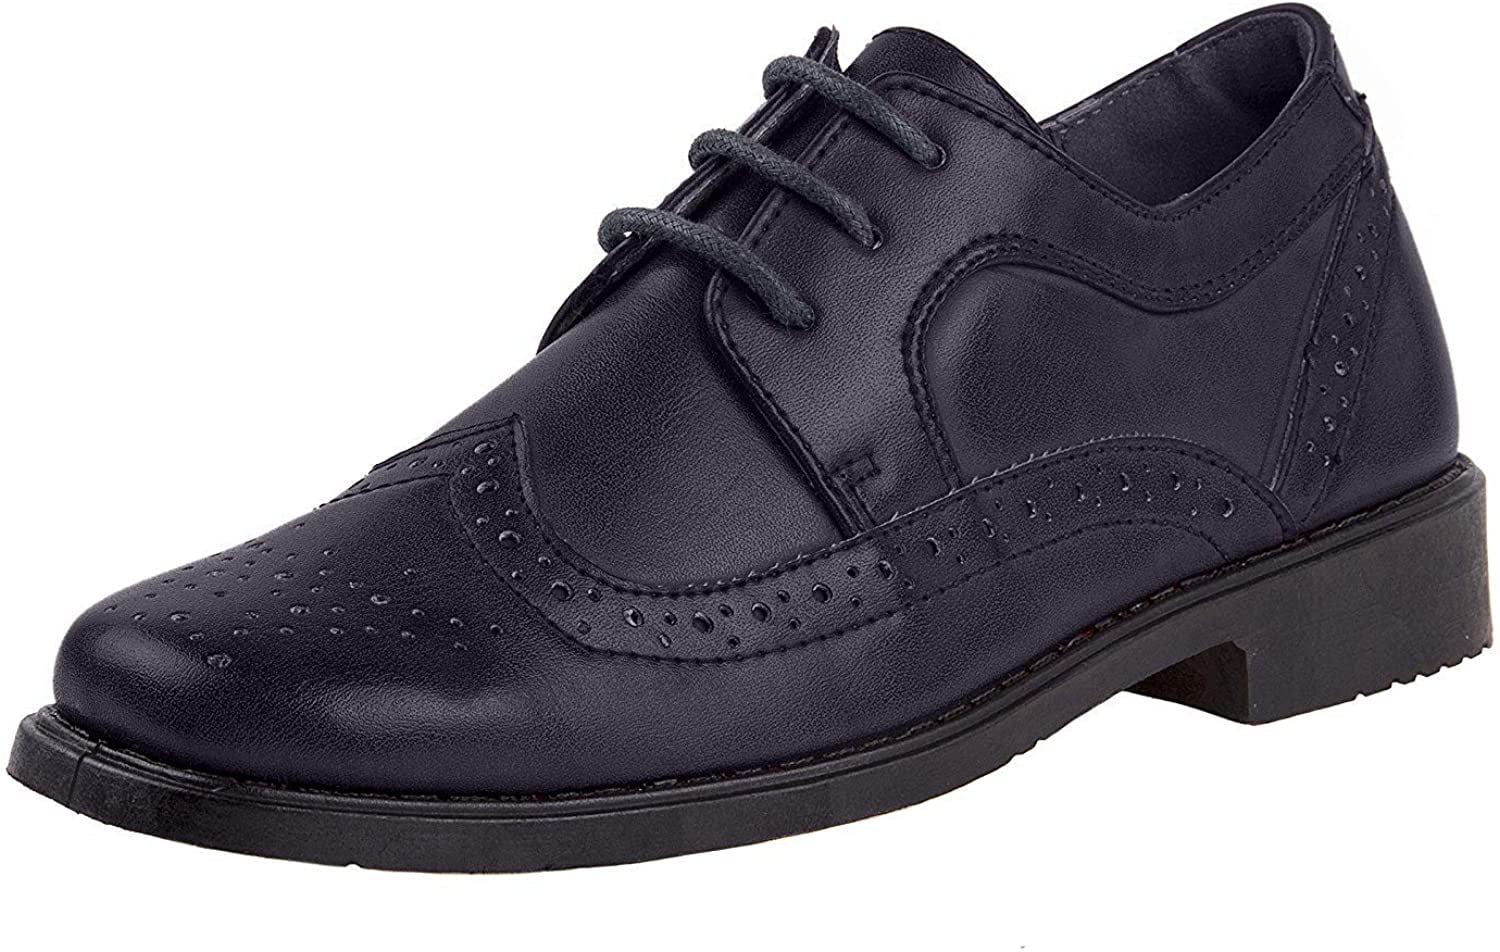 JOSMO Boys Wingtip Oxford Lace Dress Shoes Toddler, Little Kid, Big Kid